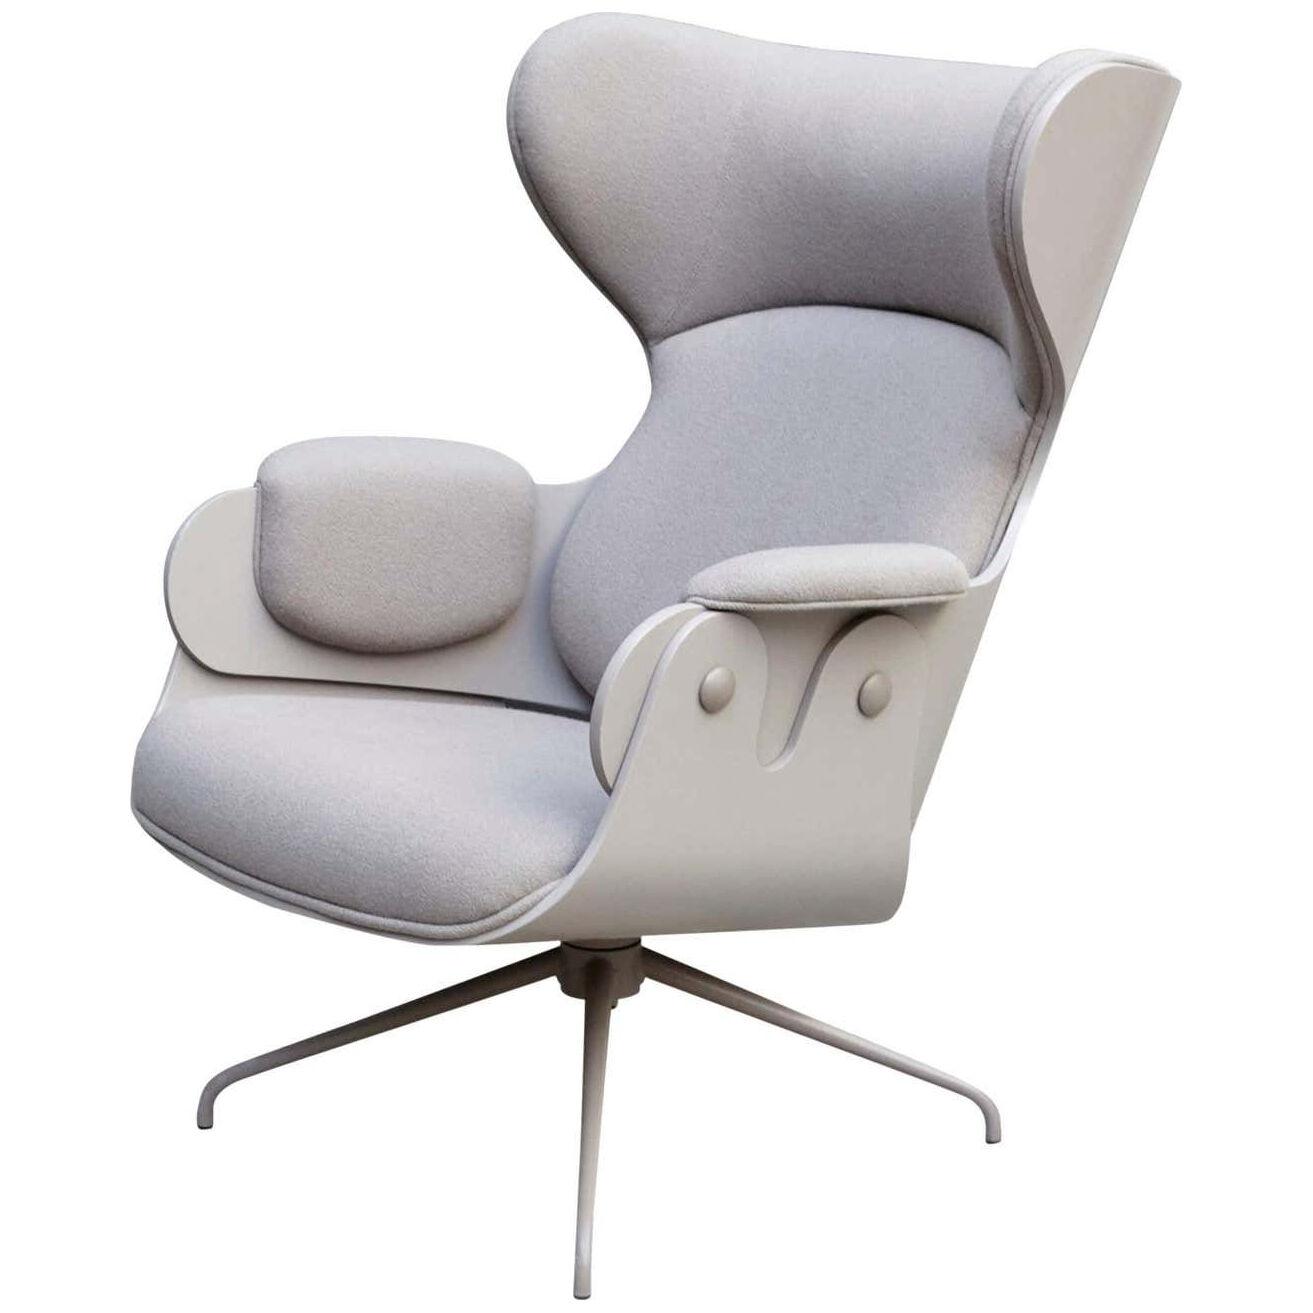 Jaime Hayon, Contemporary, Plywood Grey Upholstery Lounger Armchair